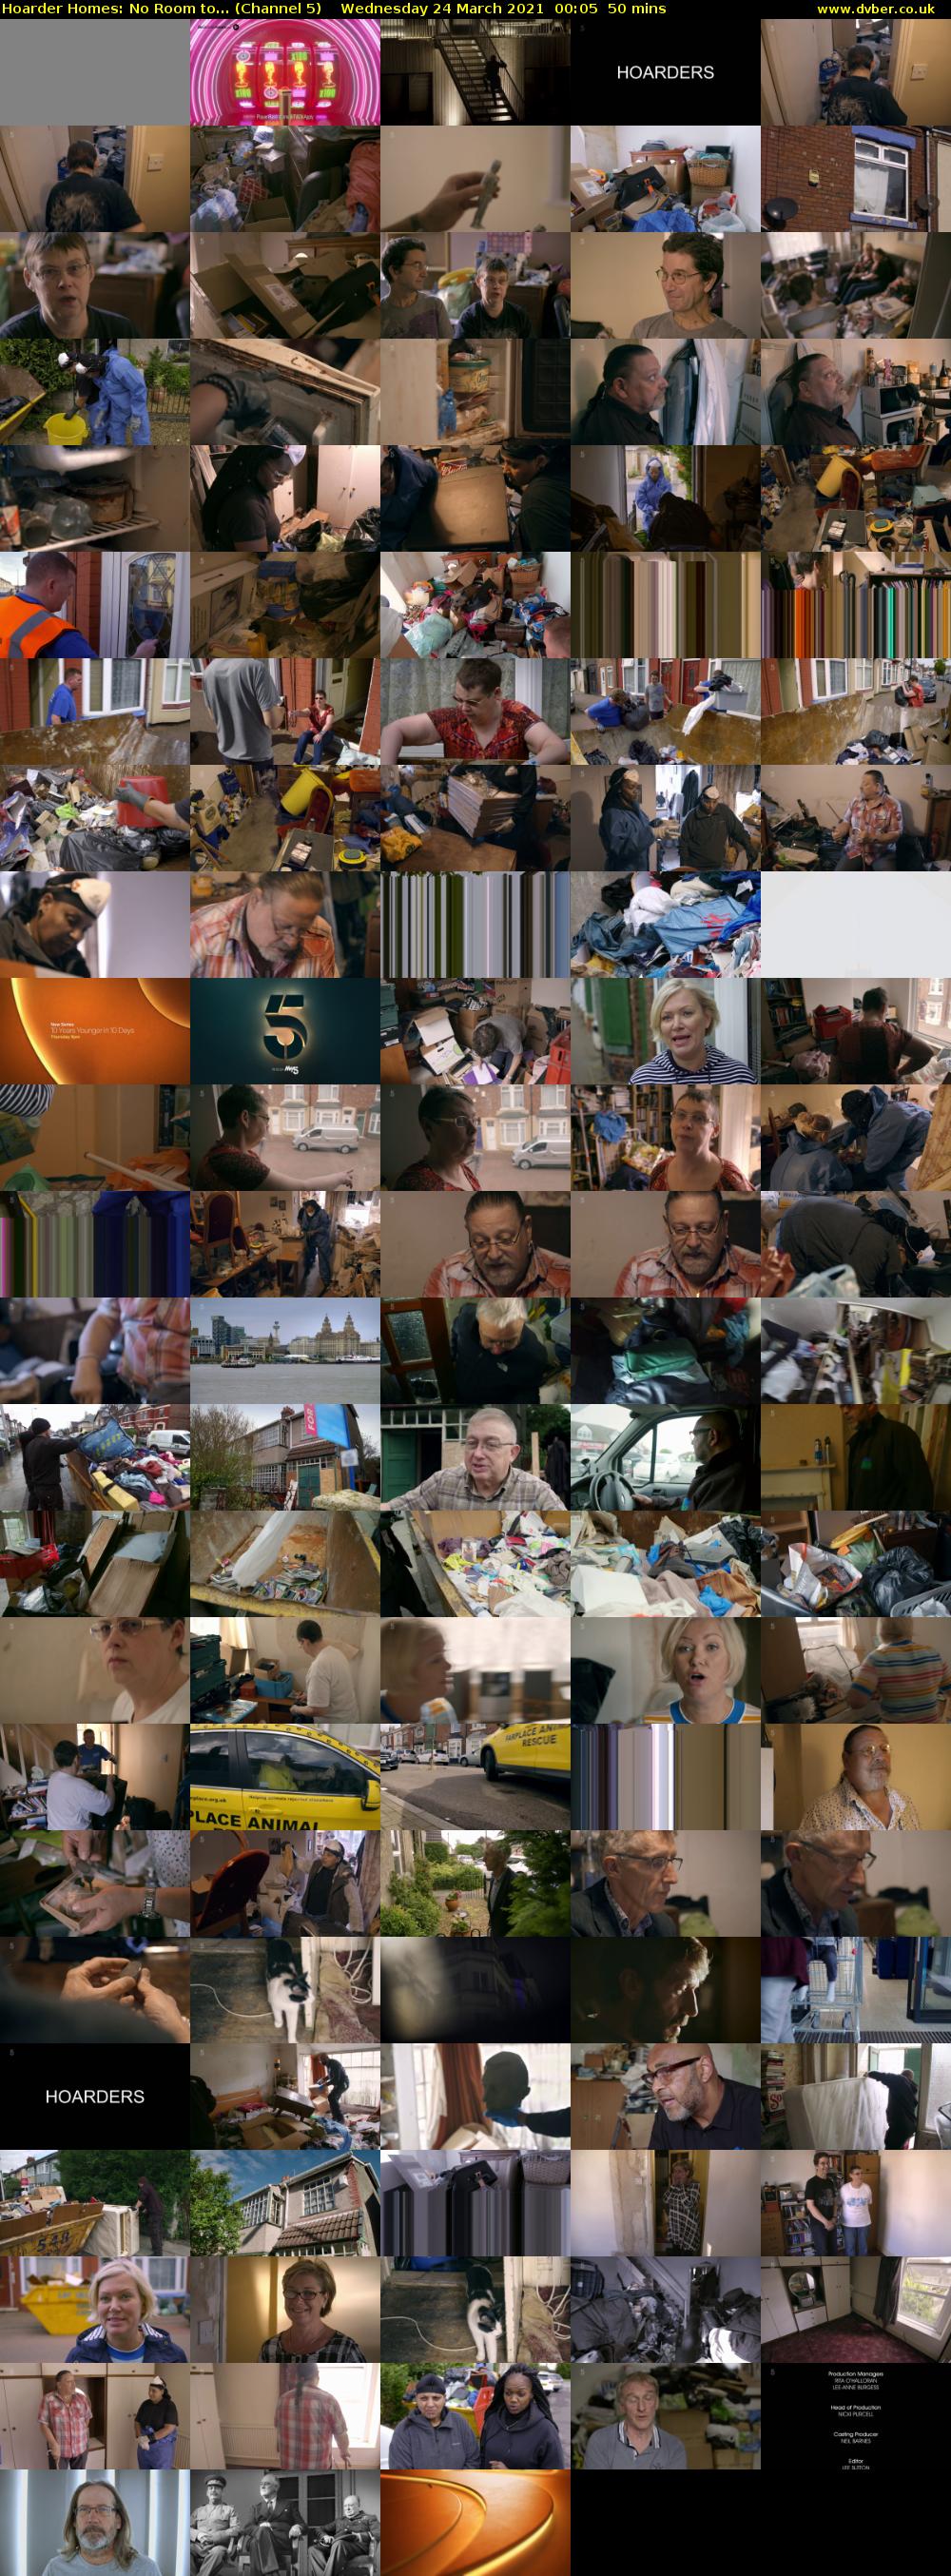 Hoarder Homes: No Room to... (Channel 5) Wednesday 24 March 2021 00:05 - 00:55